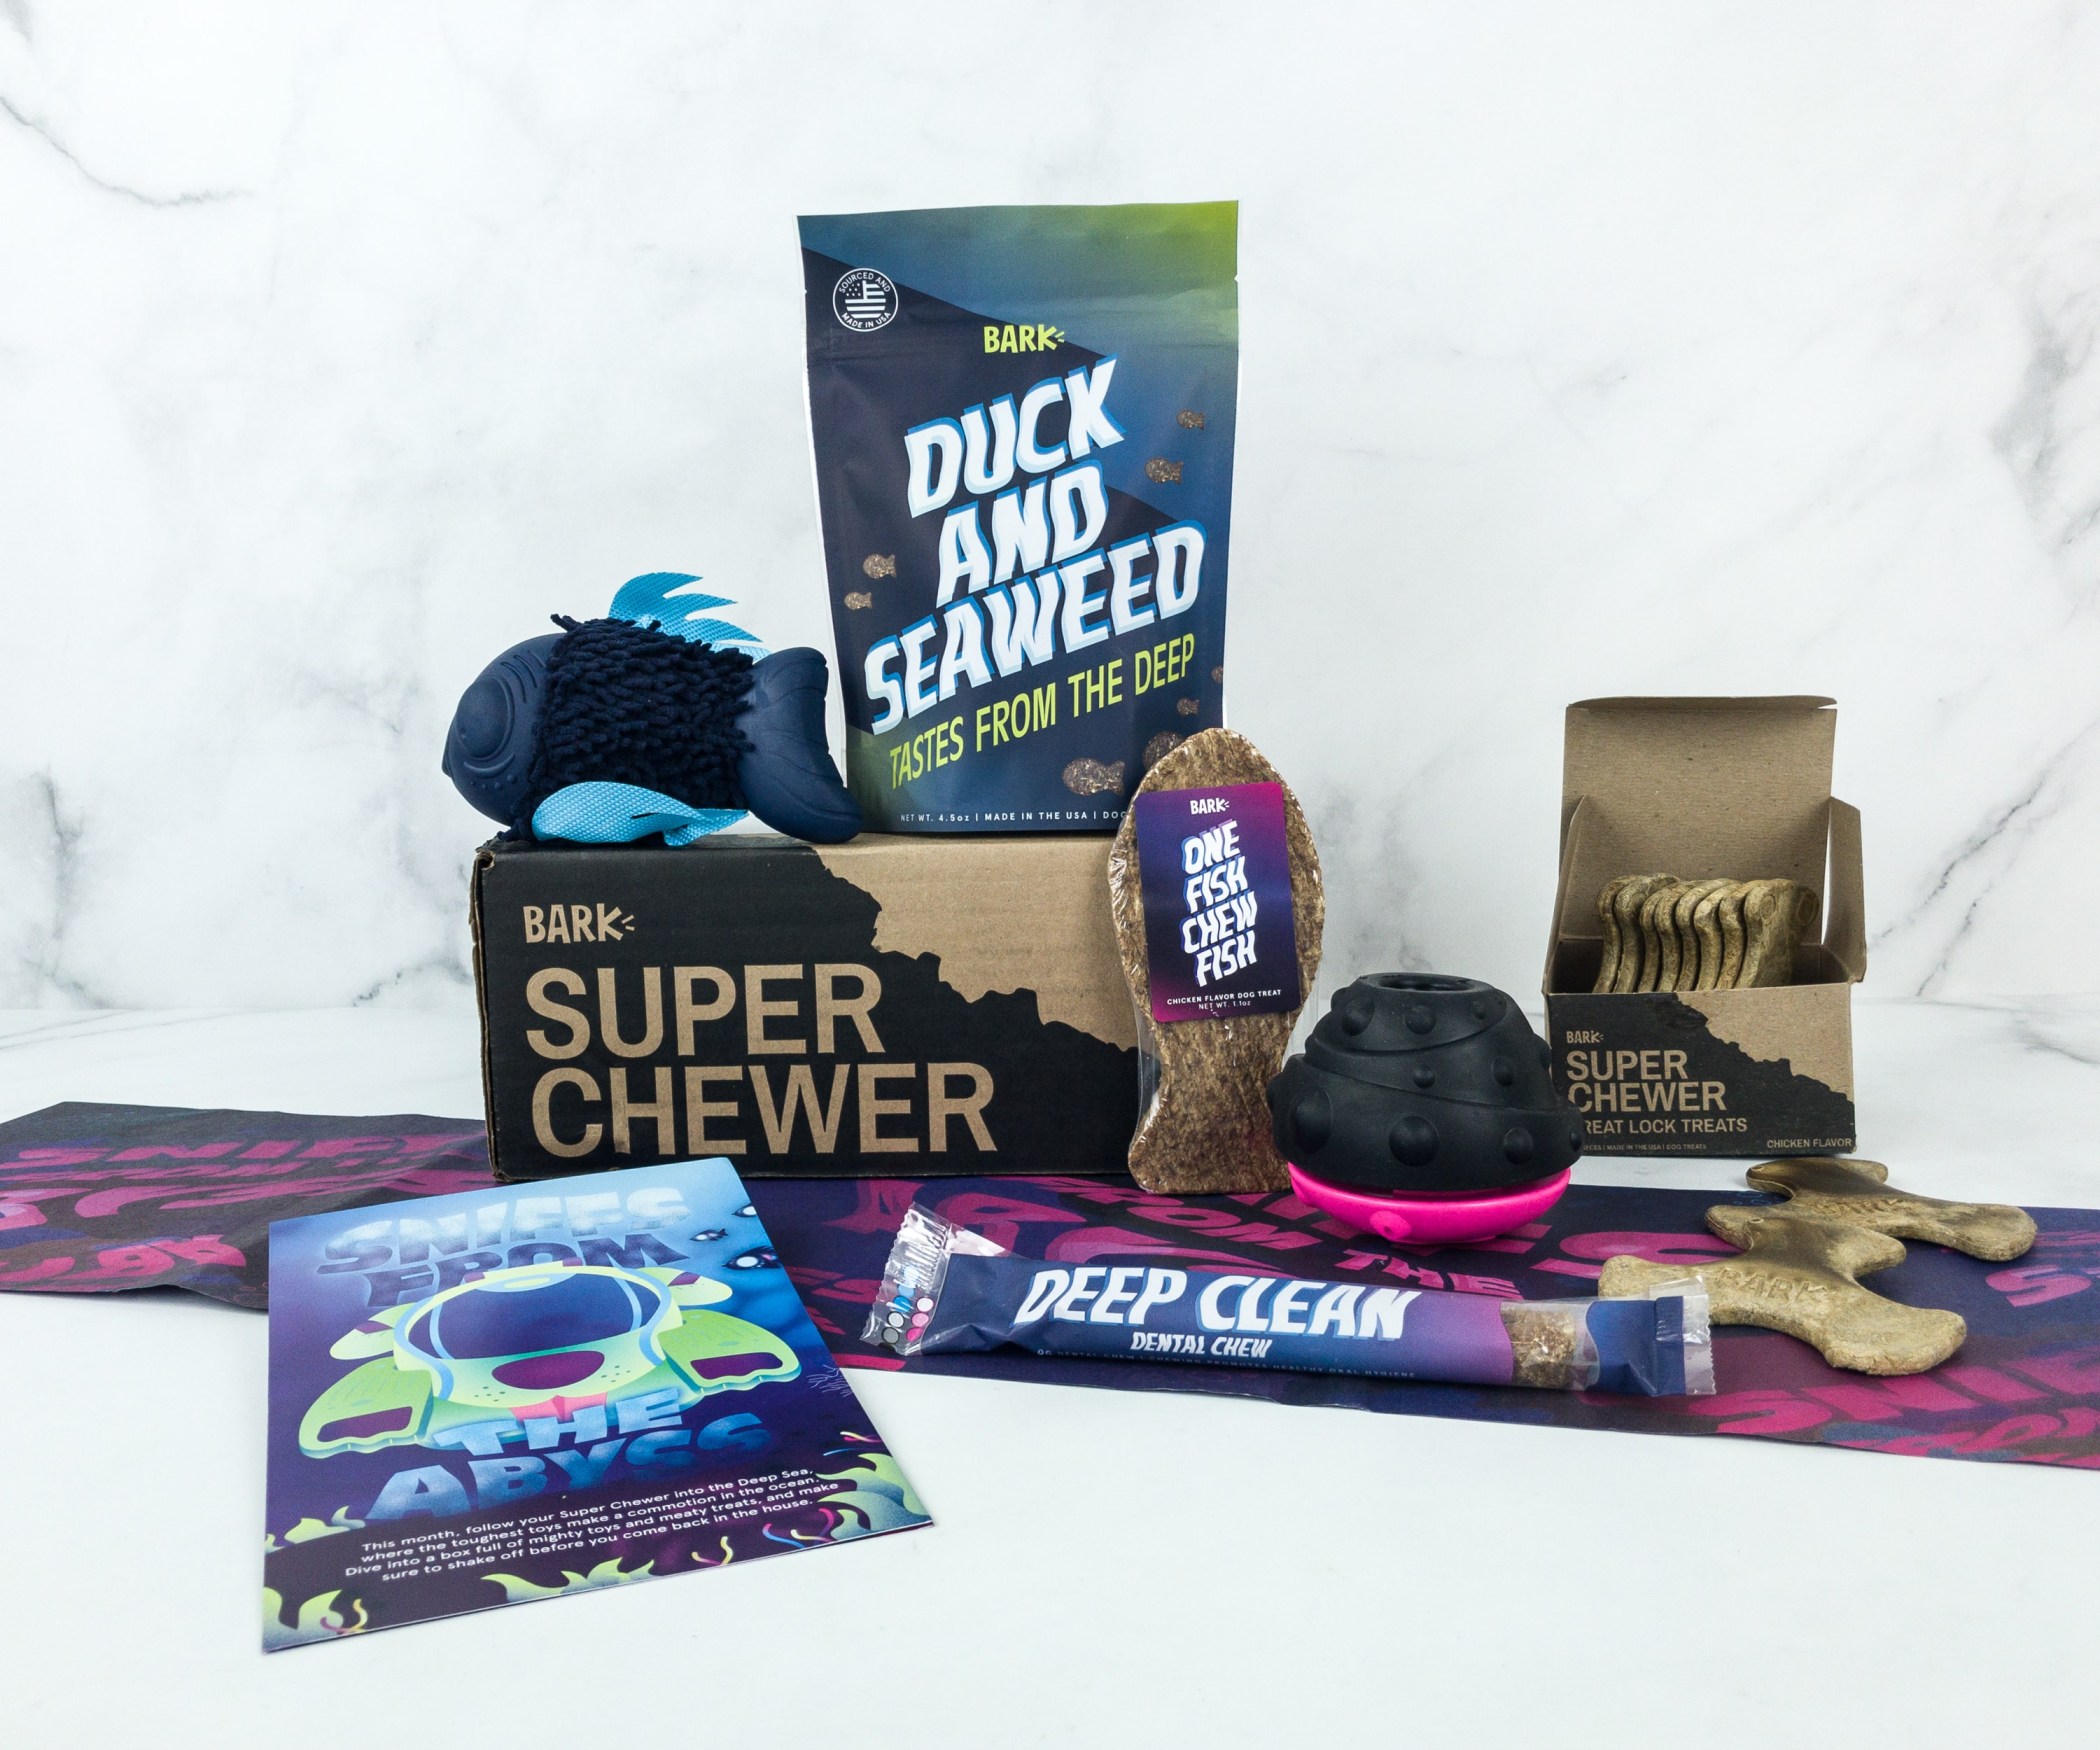 Super Chewer Reviews Get All The Details At Hello Subscription!